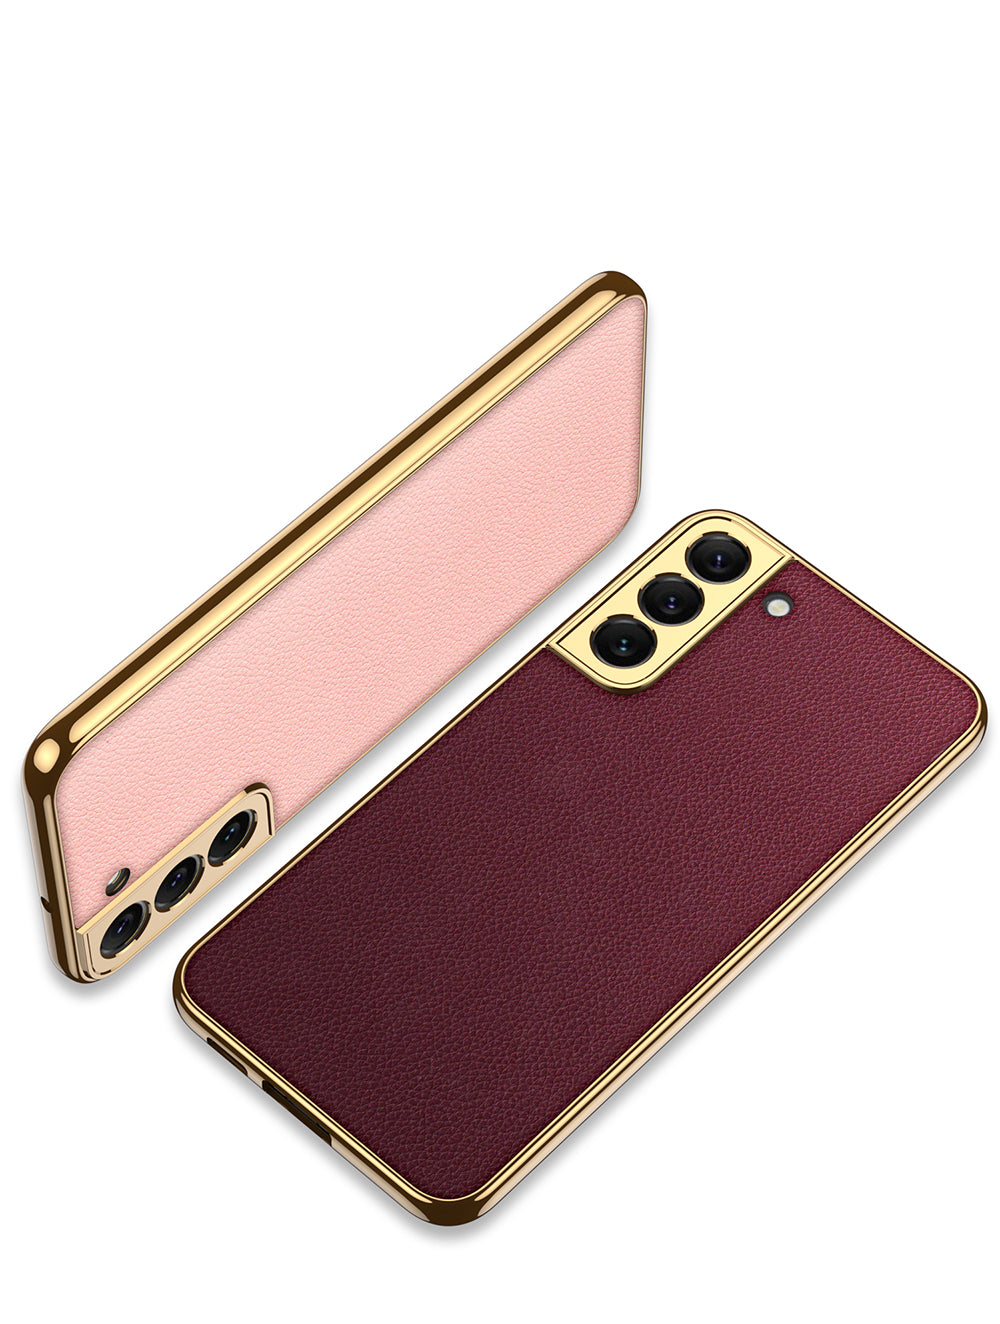 Plating Leather Case For Samsung Galaxy S22 Plus Ultra Case Lens Protection Soft Cover For Samsung S22 Ultra Plus